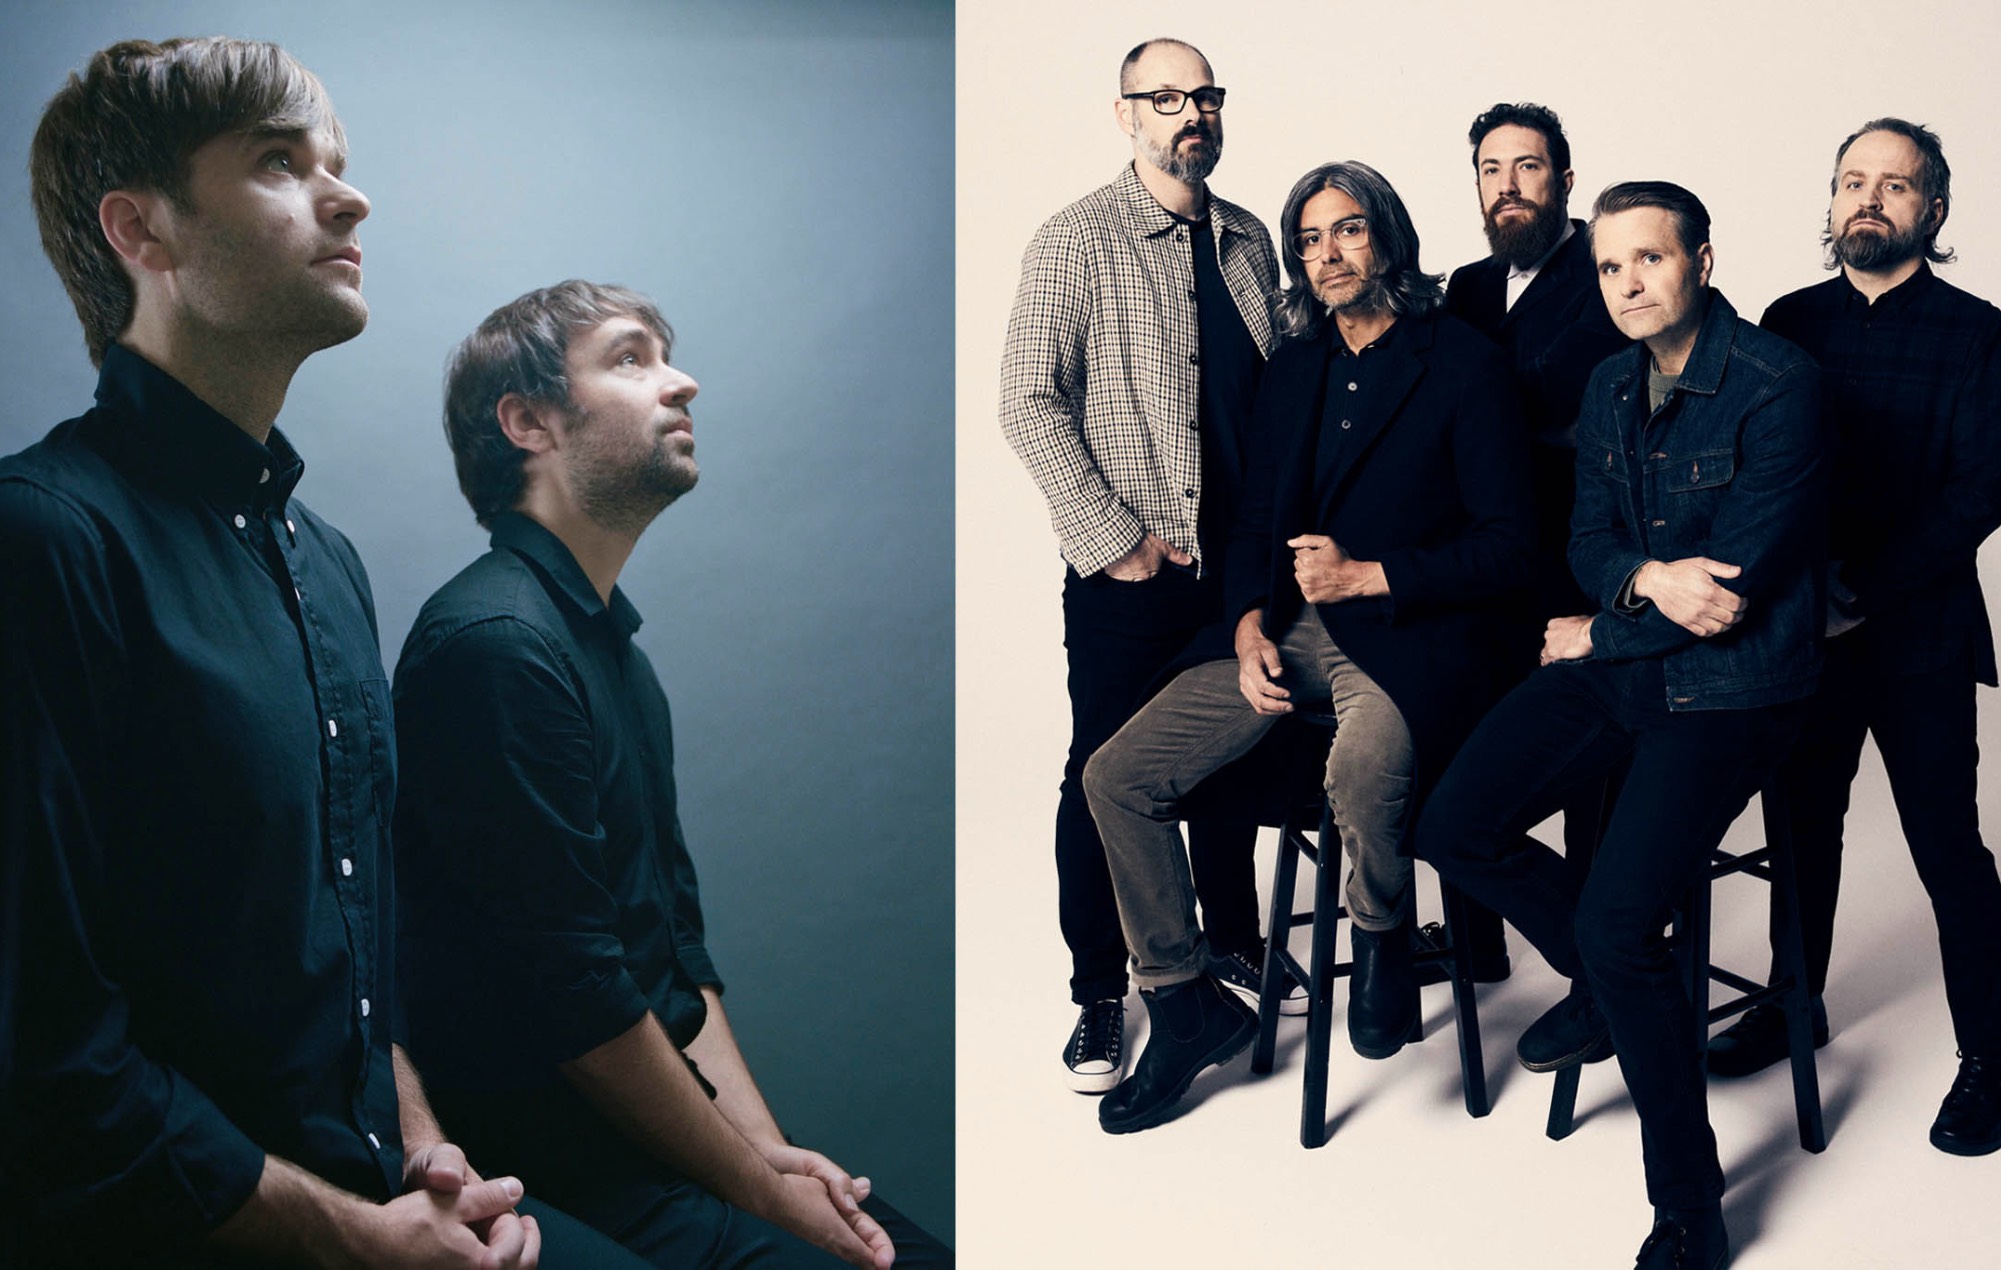 The Postal Service and Death Cab for Cutie unveiled as joint headliners for All Points East